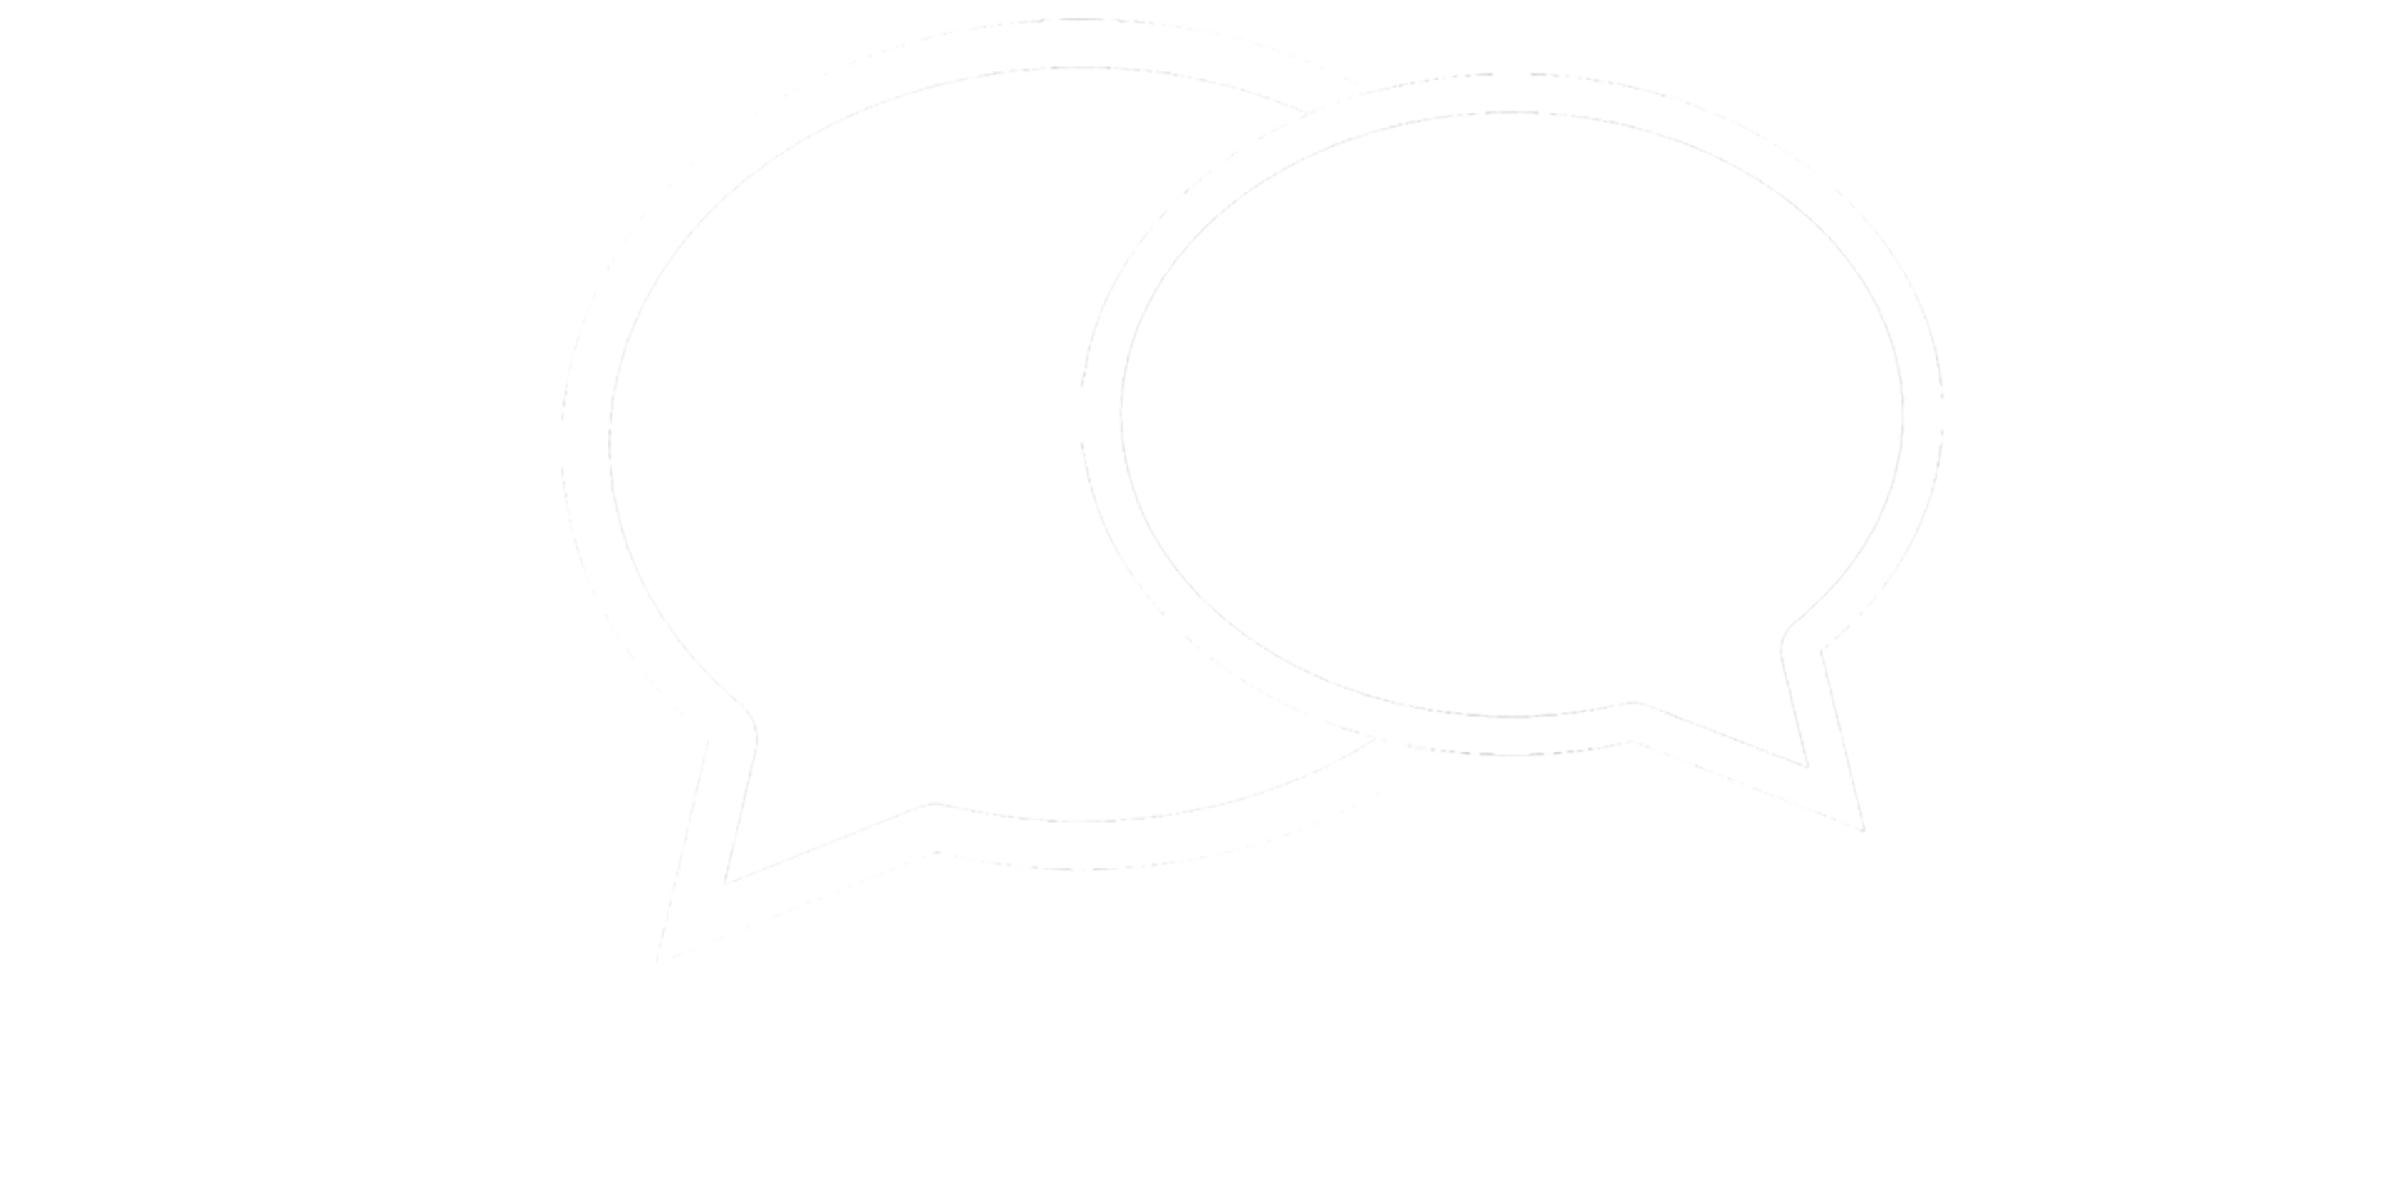 WHAT IS THE BIBLE TALKS?